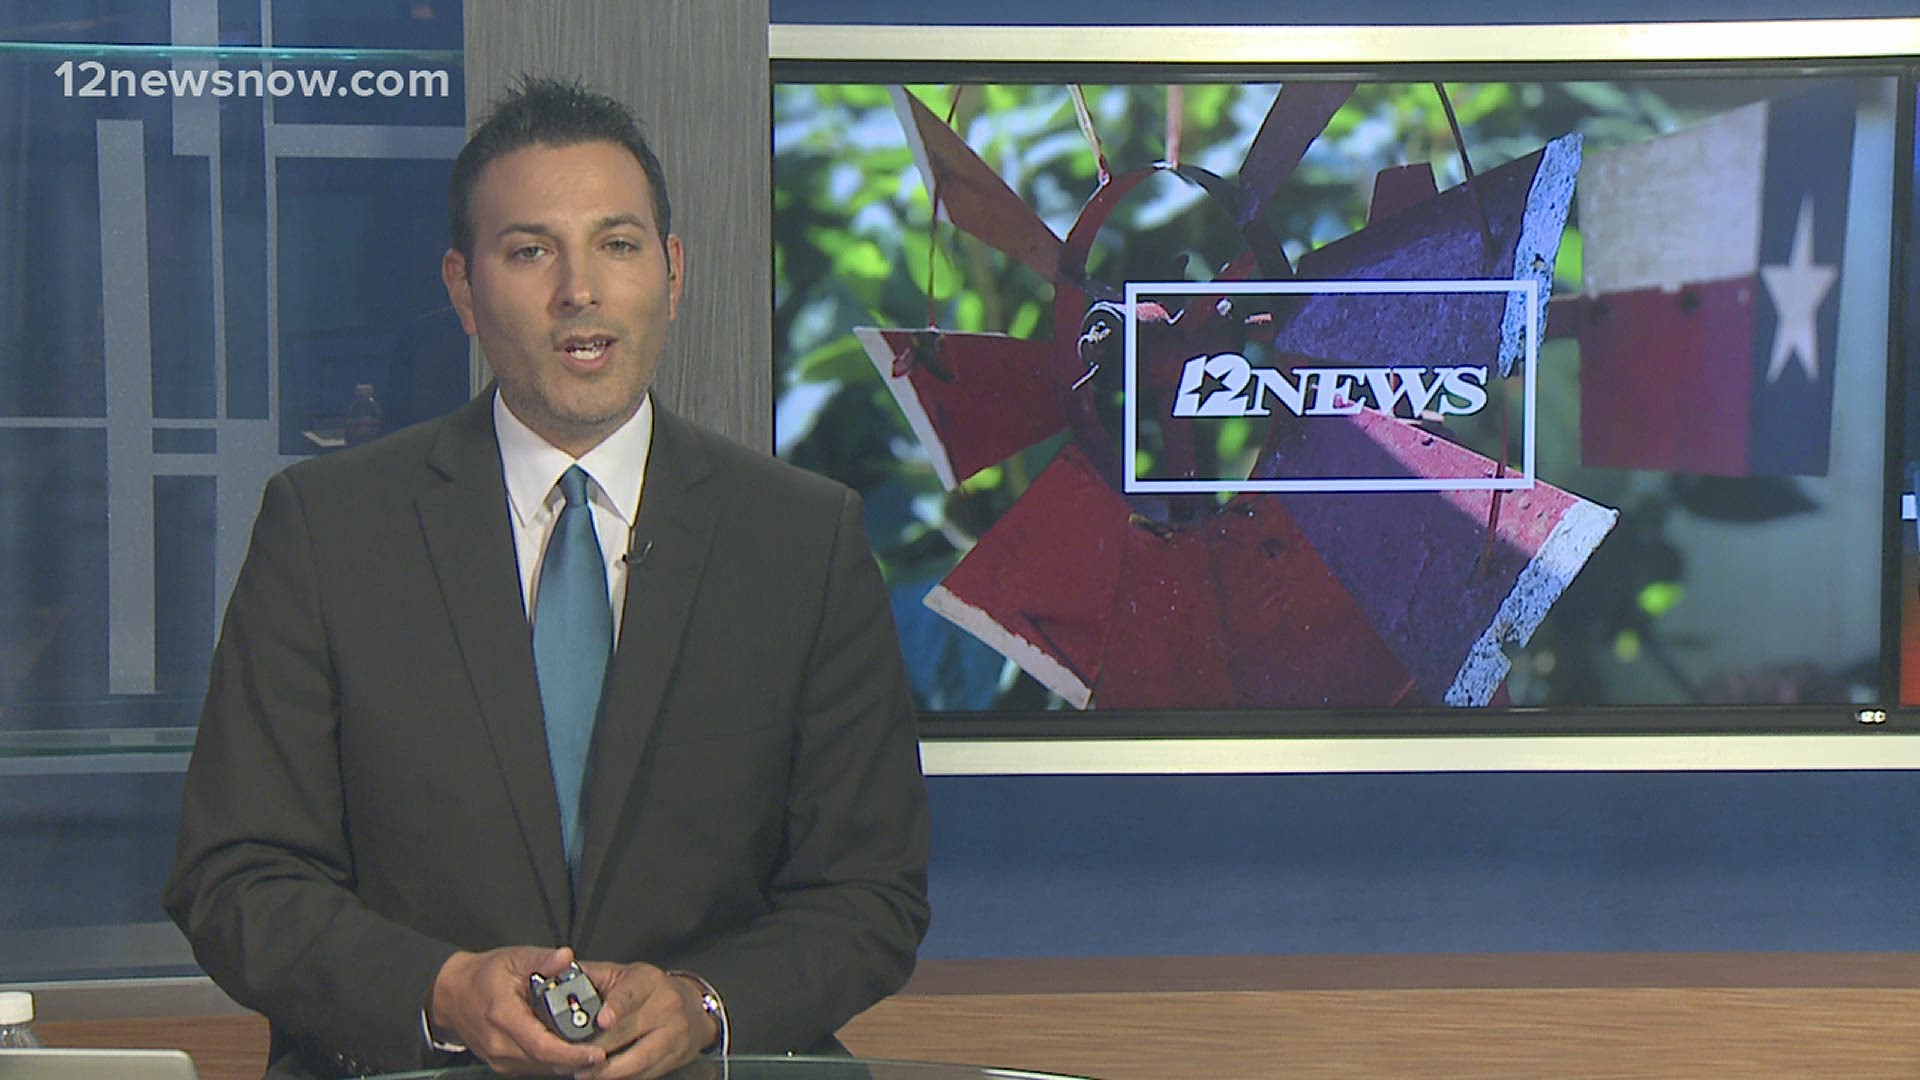 Here's your Wednesday midday headlines and weather for May 19, 2021.